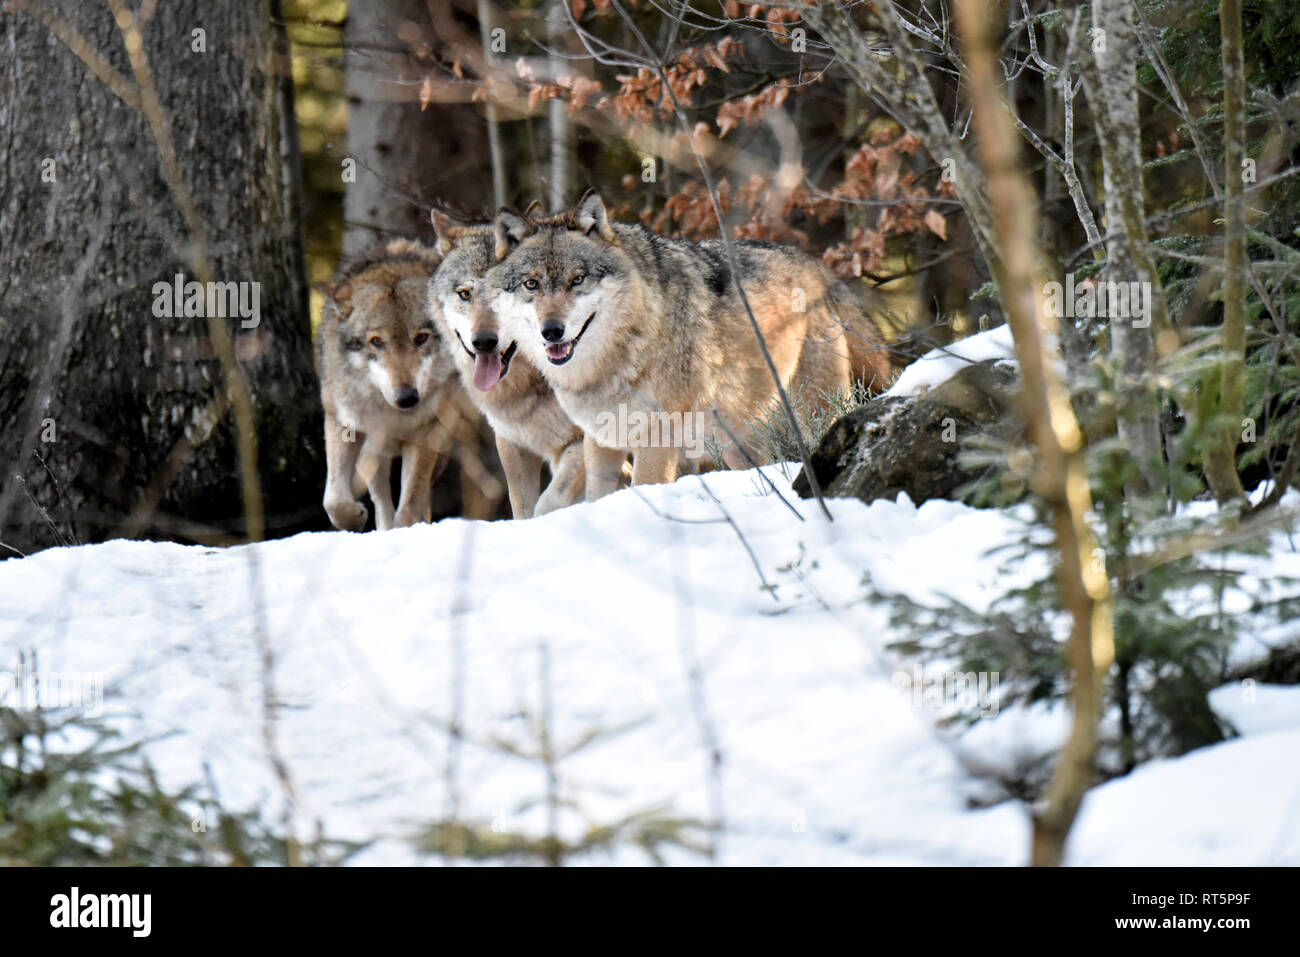 Canine, Canis lupus, local animals, Endemically, European wolf, frost, grey wolf, doggy, Isegrimm, cold, emergency time, mating season, Mating, Ranzze Stock Photo